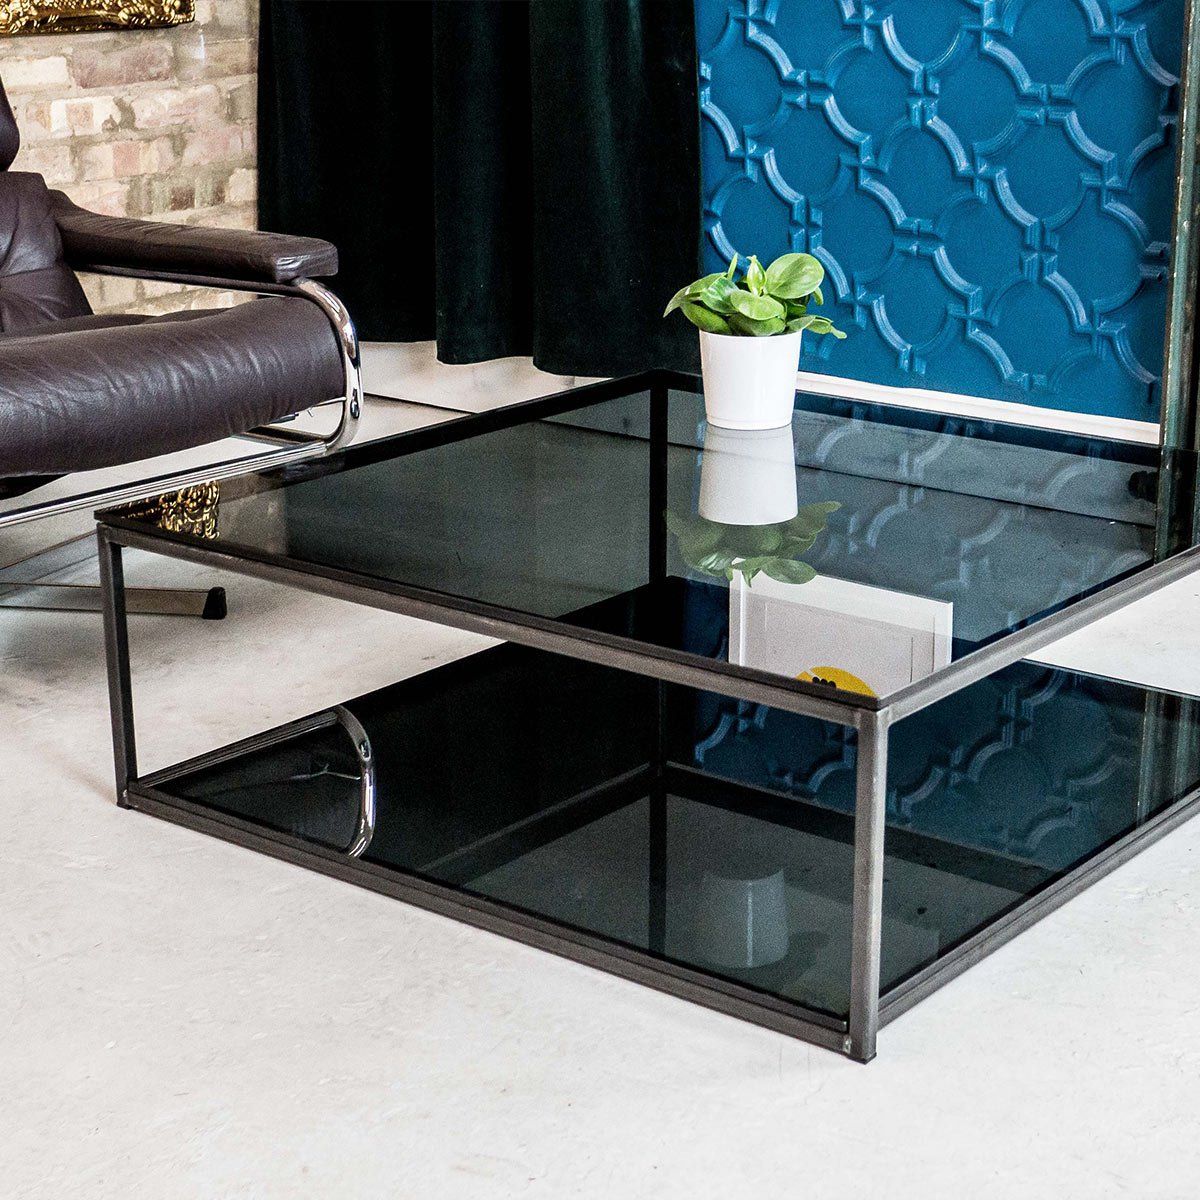 Glass Coffee Table With Shelves – 39 Modern Coffee Tables With Storage Regarding Glass Coffee Tables With Lower Shelves (Gallery 13 of 20)